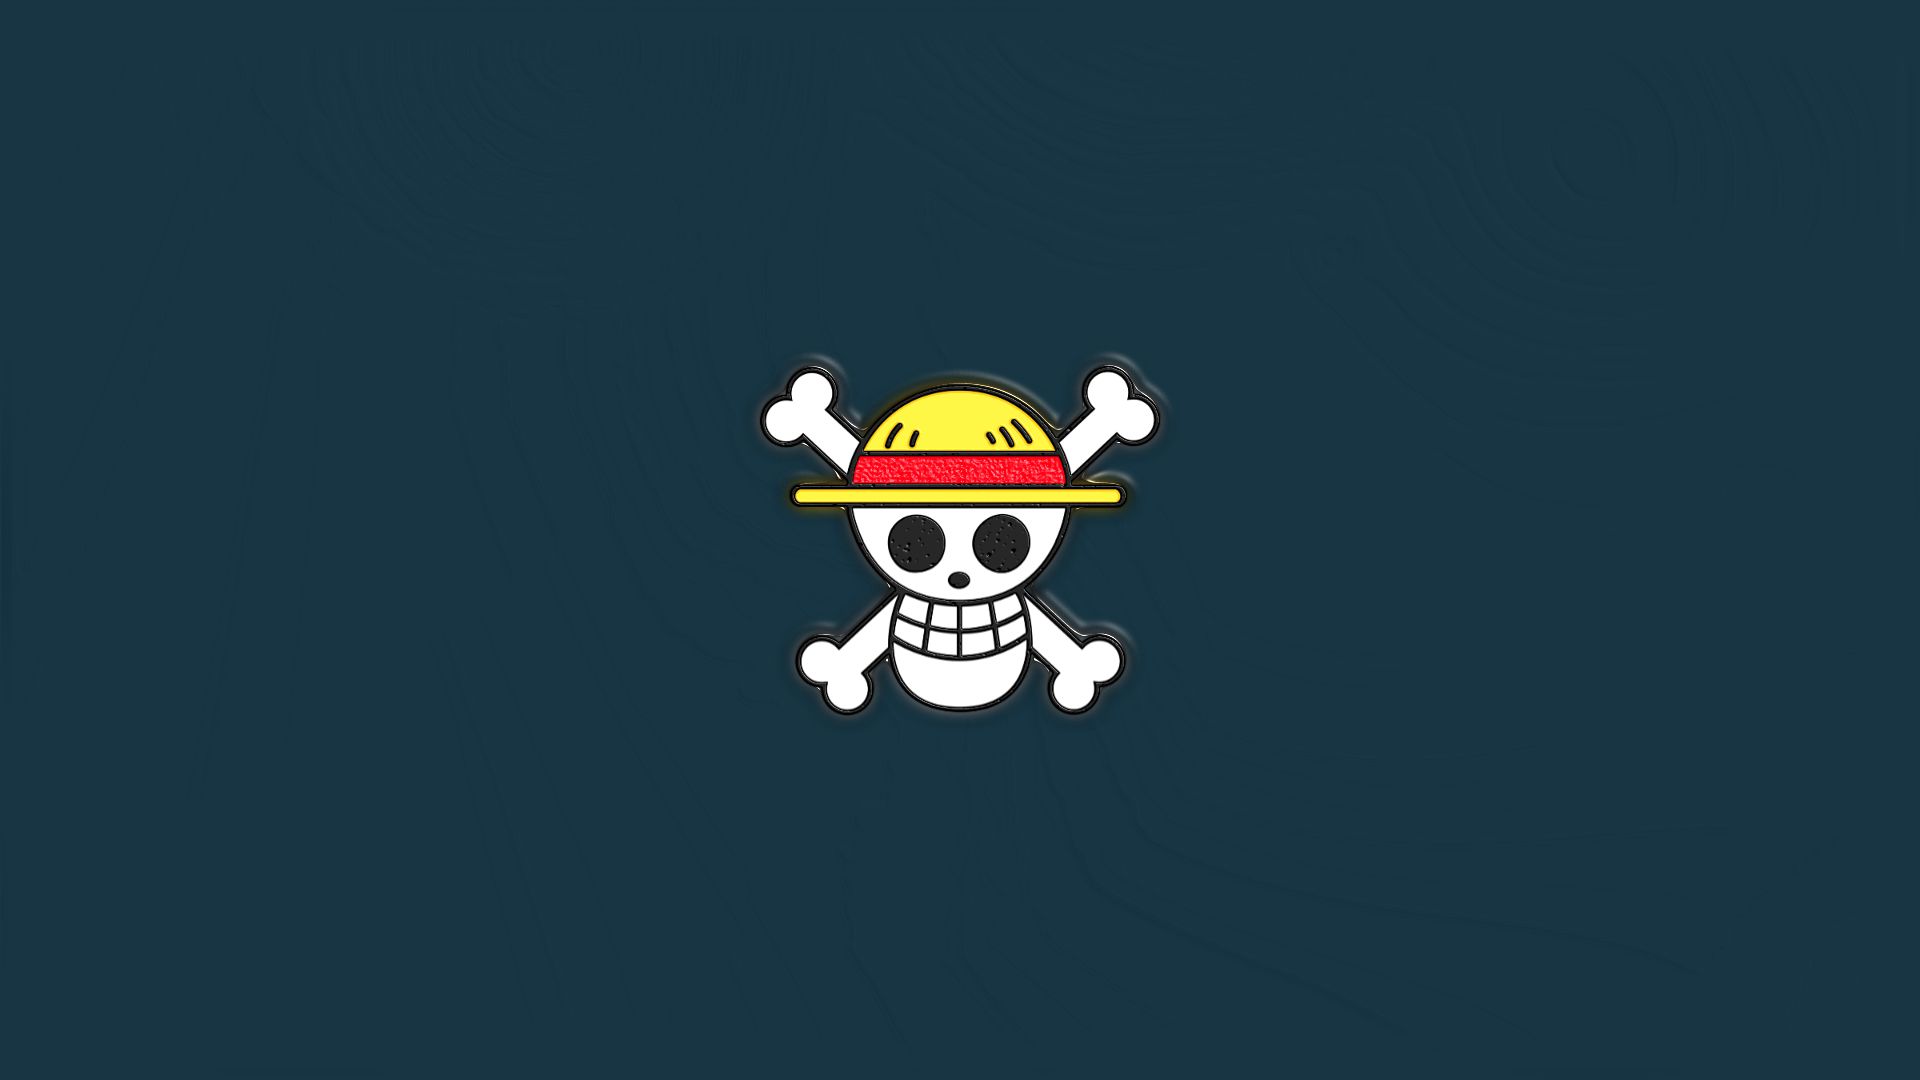 One Piece Wallpapers - Top Free One Piece Backgrounds